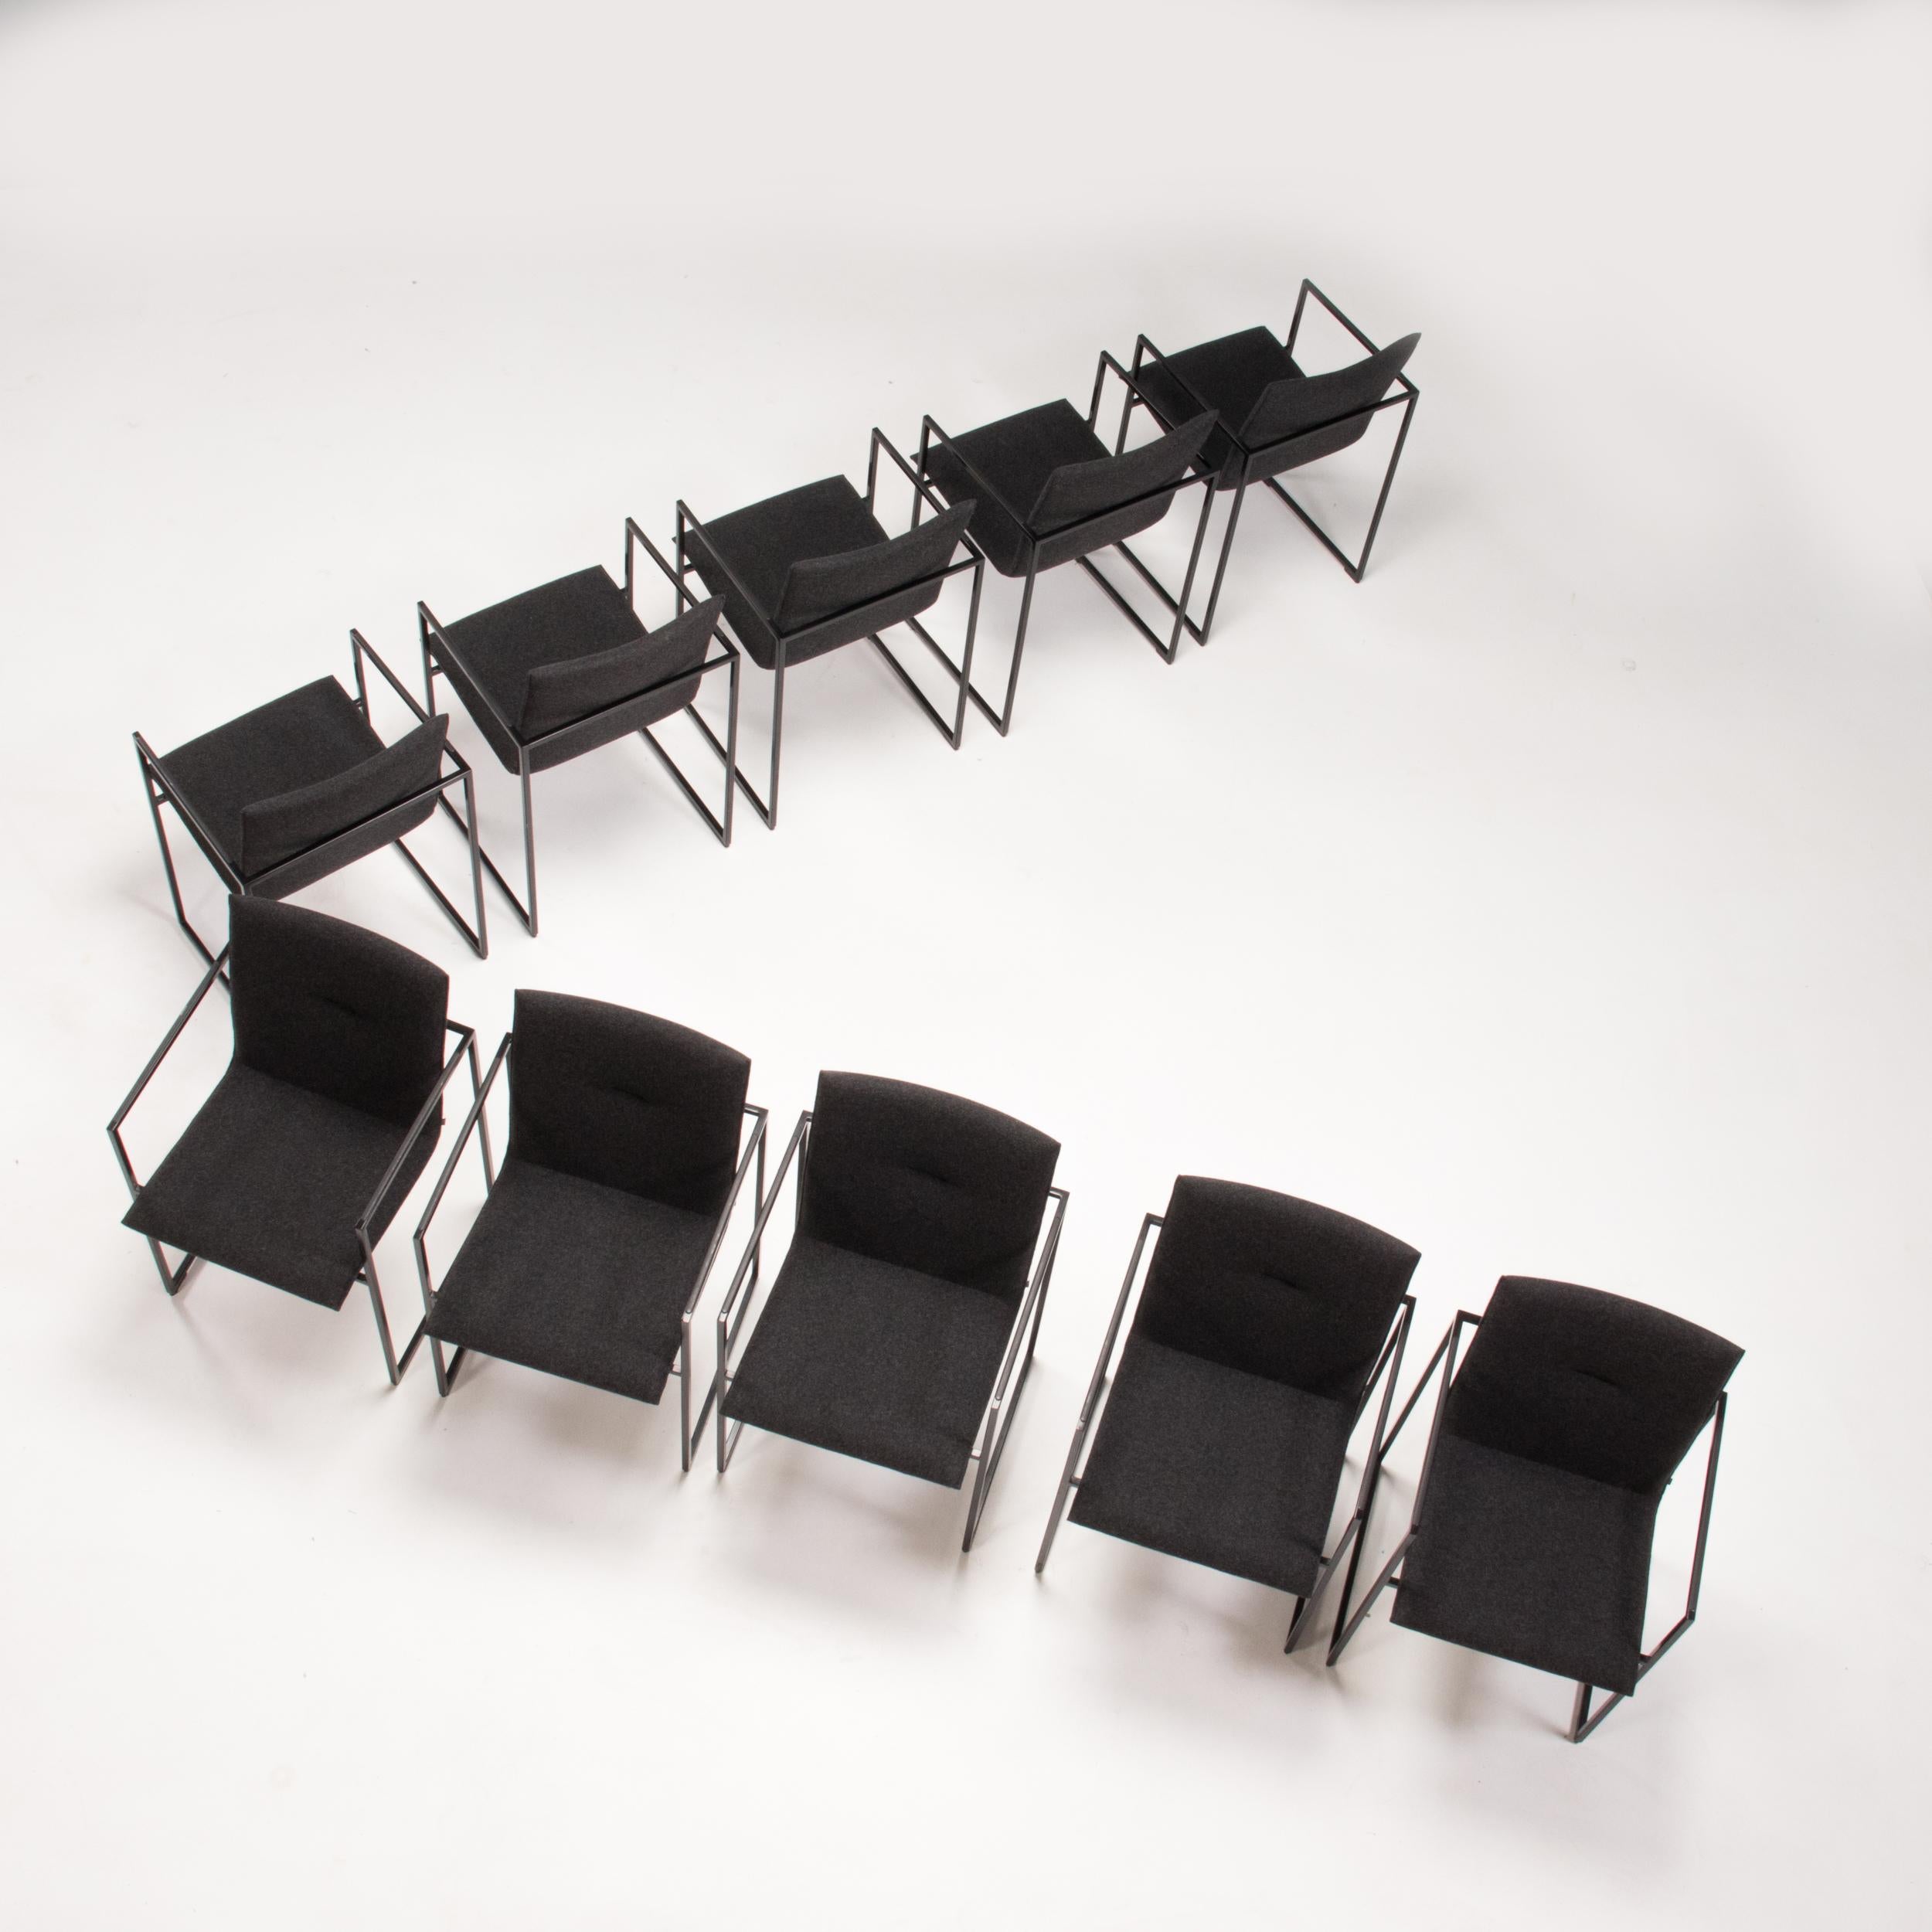 Originally designed by Burkhard Vogtherr for Arco in 2000, the Frame dining chair remains a classic piece of design.

Featuring a slimline, angular black metal frame, the dining chair gives the impression of the seat floating within it.

The sling